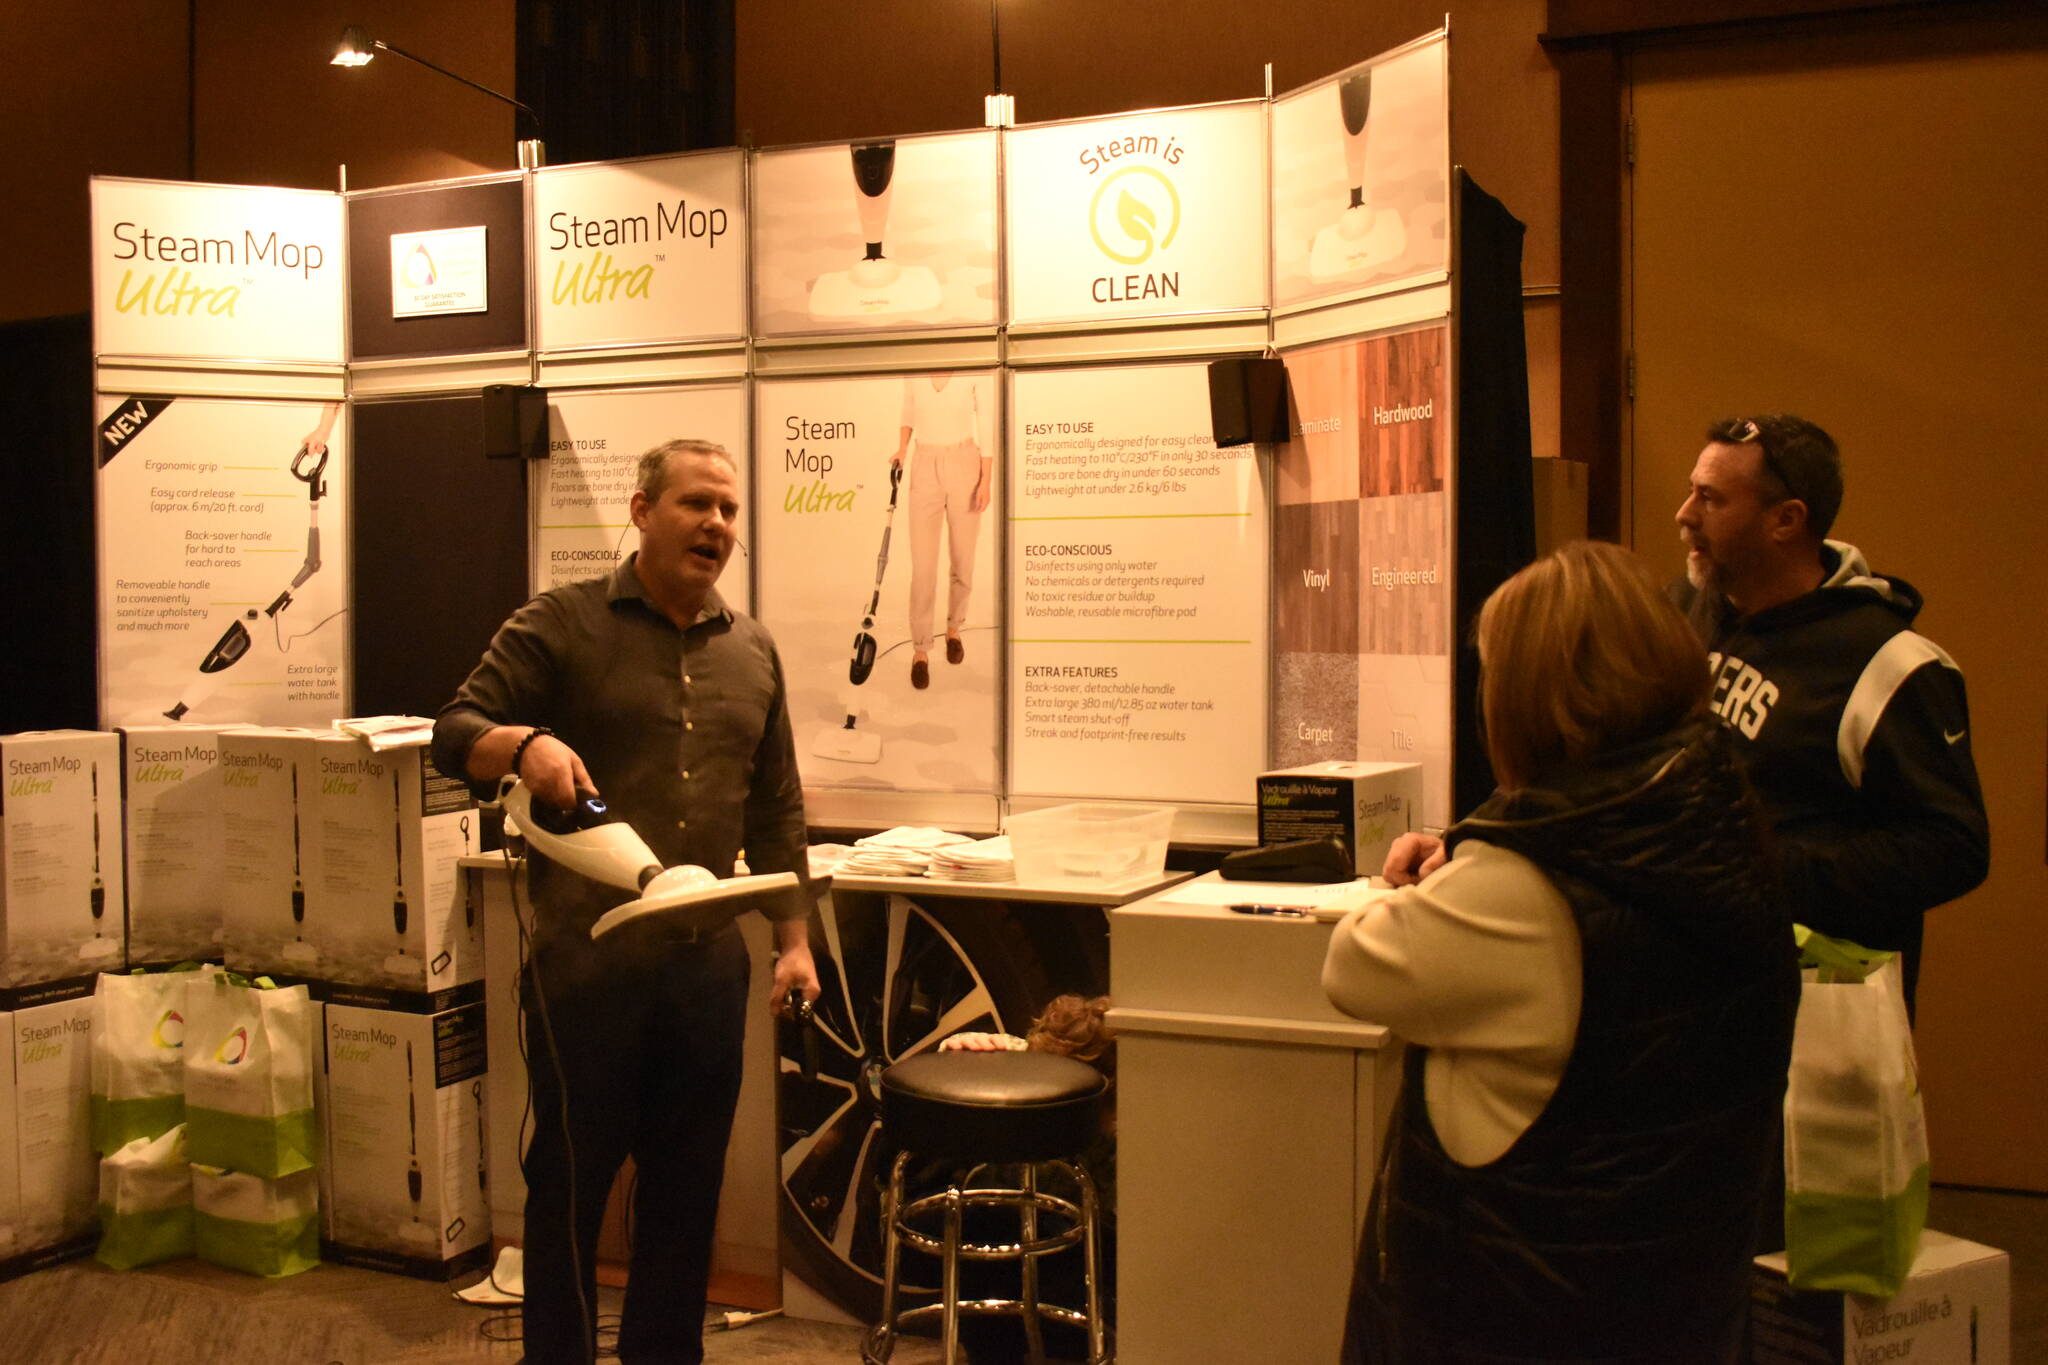 Home and garden experts behind their respective booths were on hand to answer questions. (Logan Lockhart-Western News)